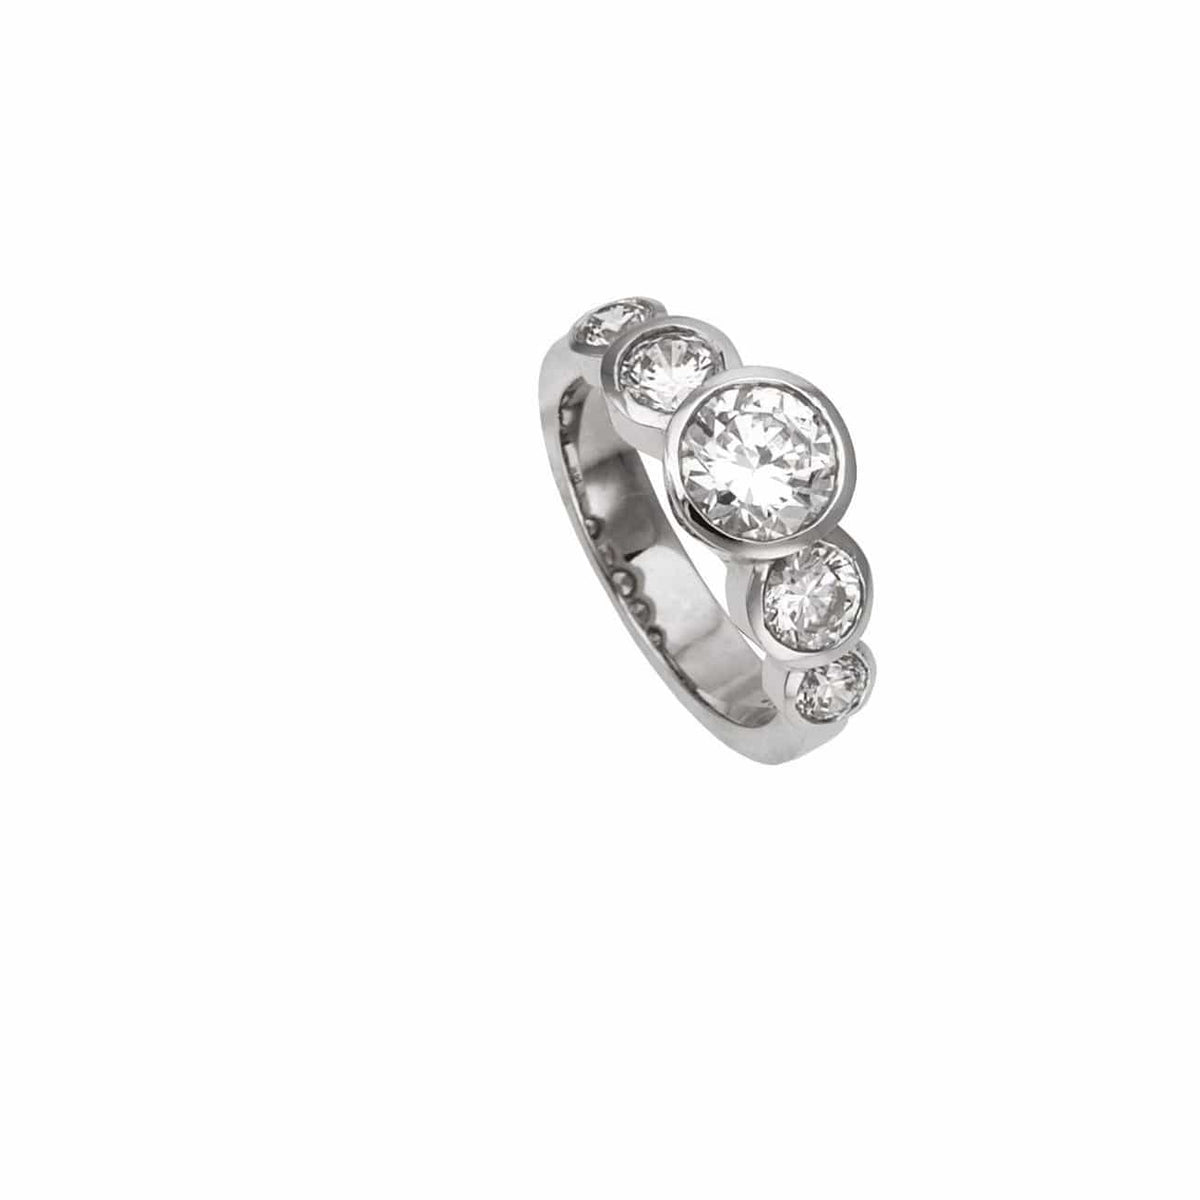 CHRIS AIRE QUINTUPLE  ENGAGEMENT RING - Chris Aire Fine Jewelry & Timepieces